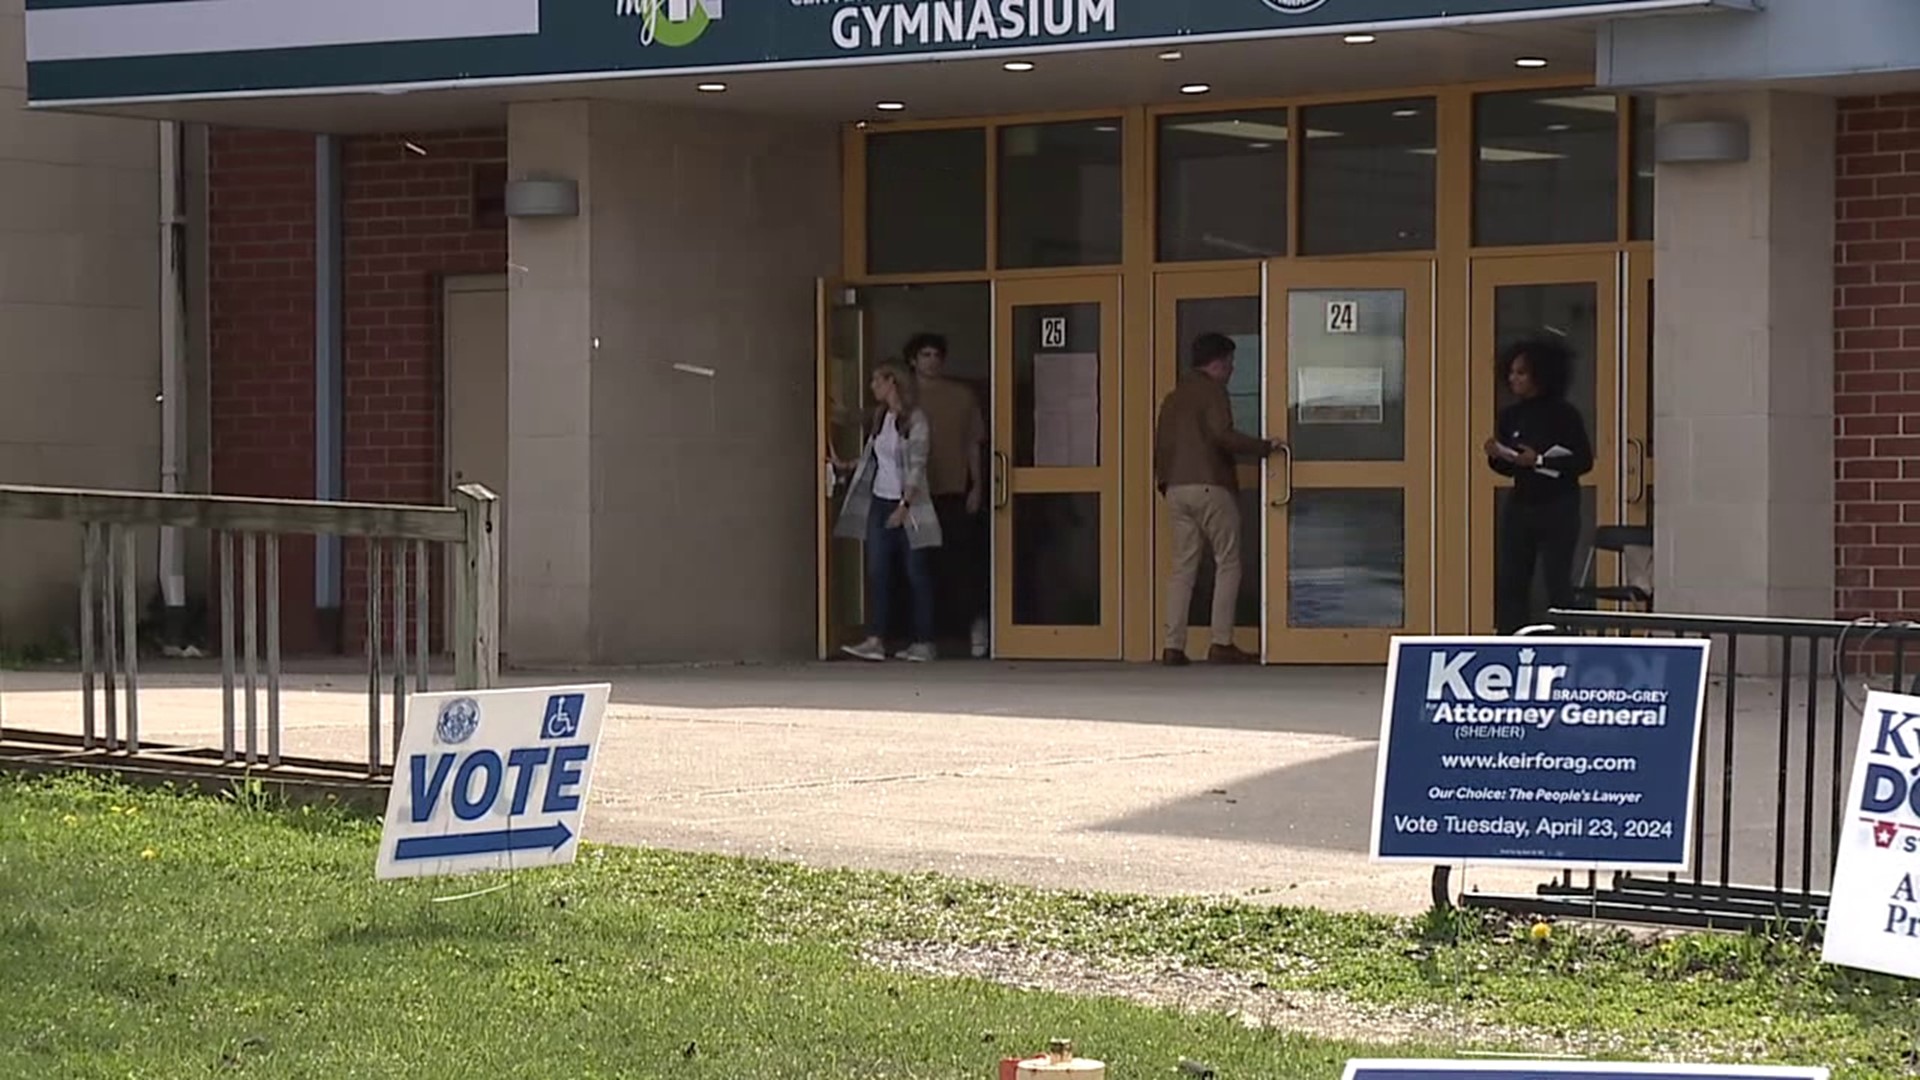 It's been a light day for polling sites across Lackawanna County, according to the Bureau of Elections.